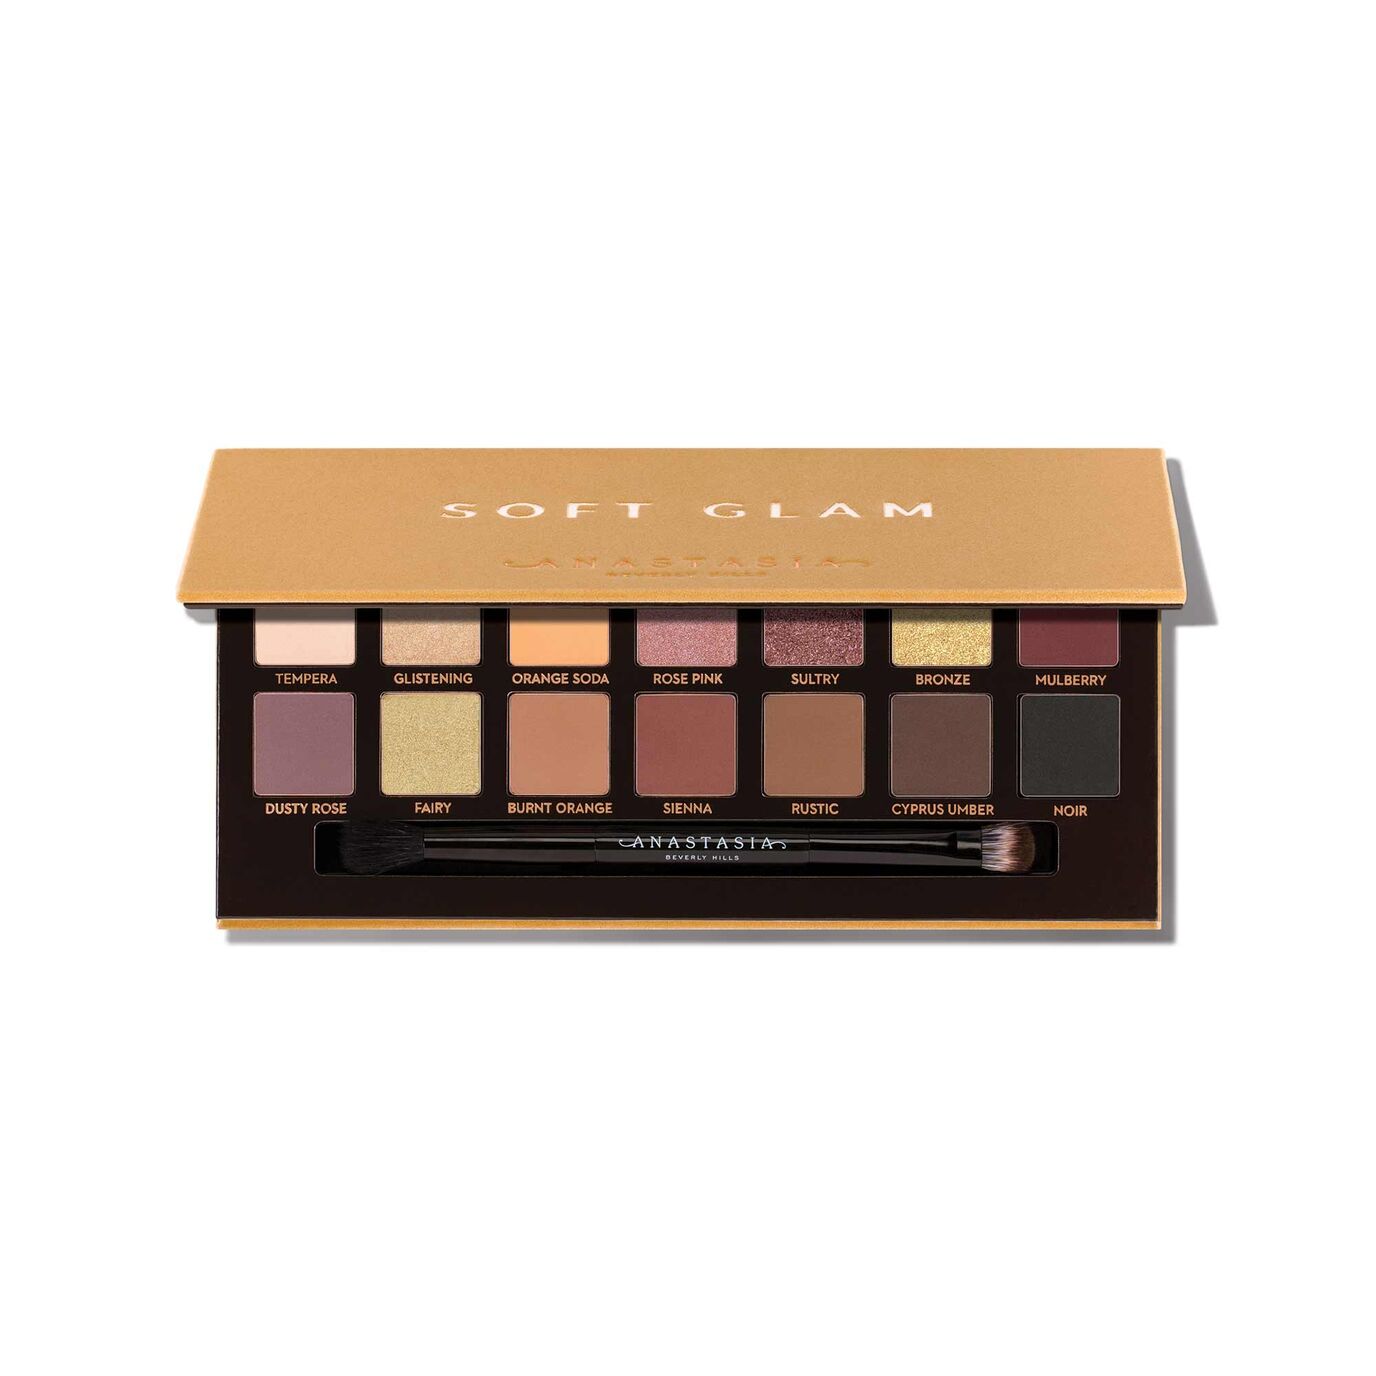 2 9 - Anastasia Beverly Hills Soft Glam Luxe